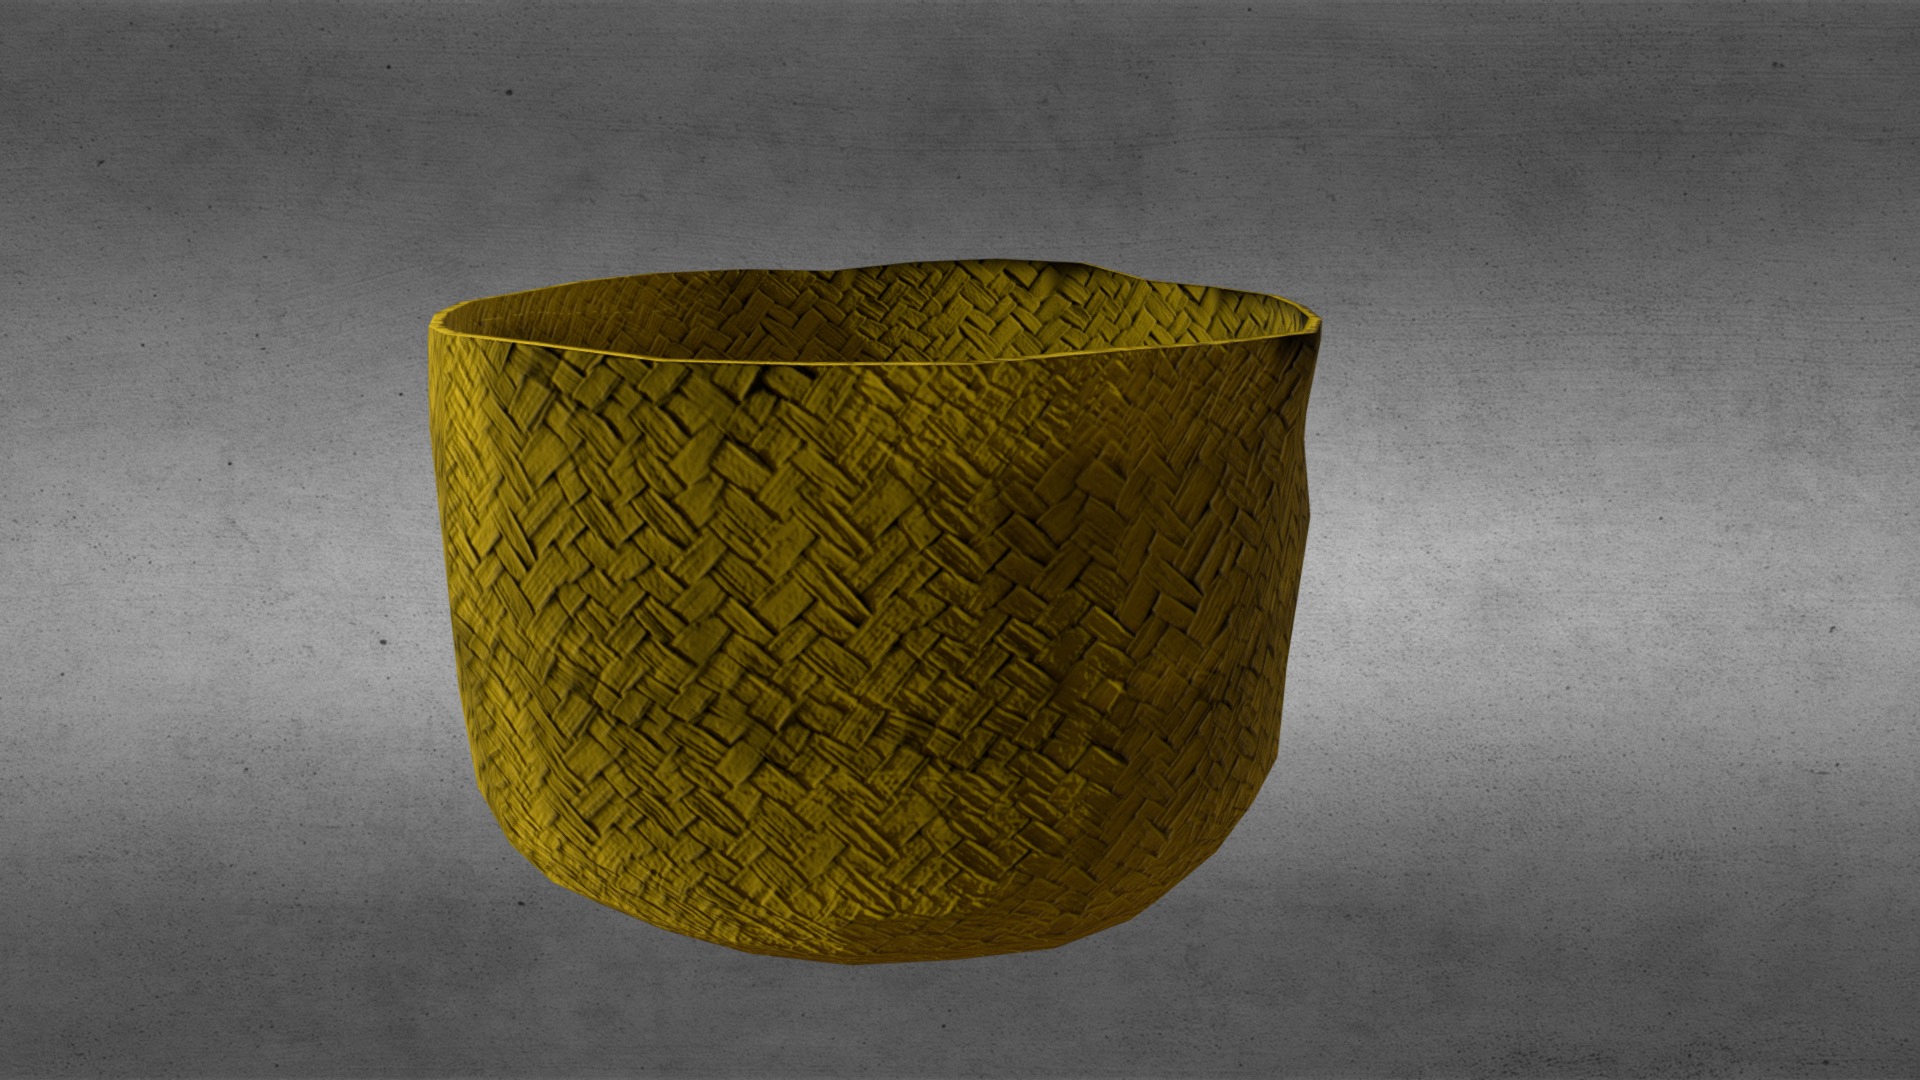 3D model Woven Handmade Basket - This is a 3D model of the Woven Handmade Basket. The 3D model is about a gold coin on a grey surface.